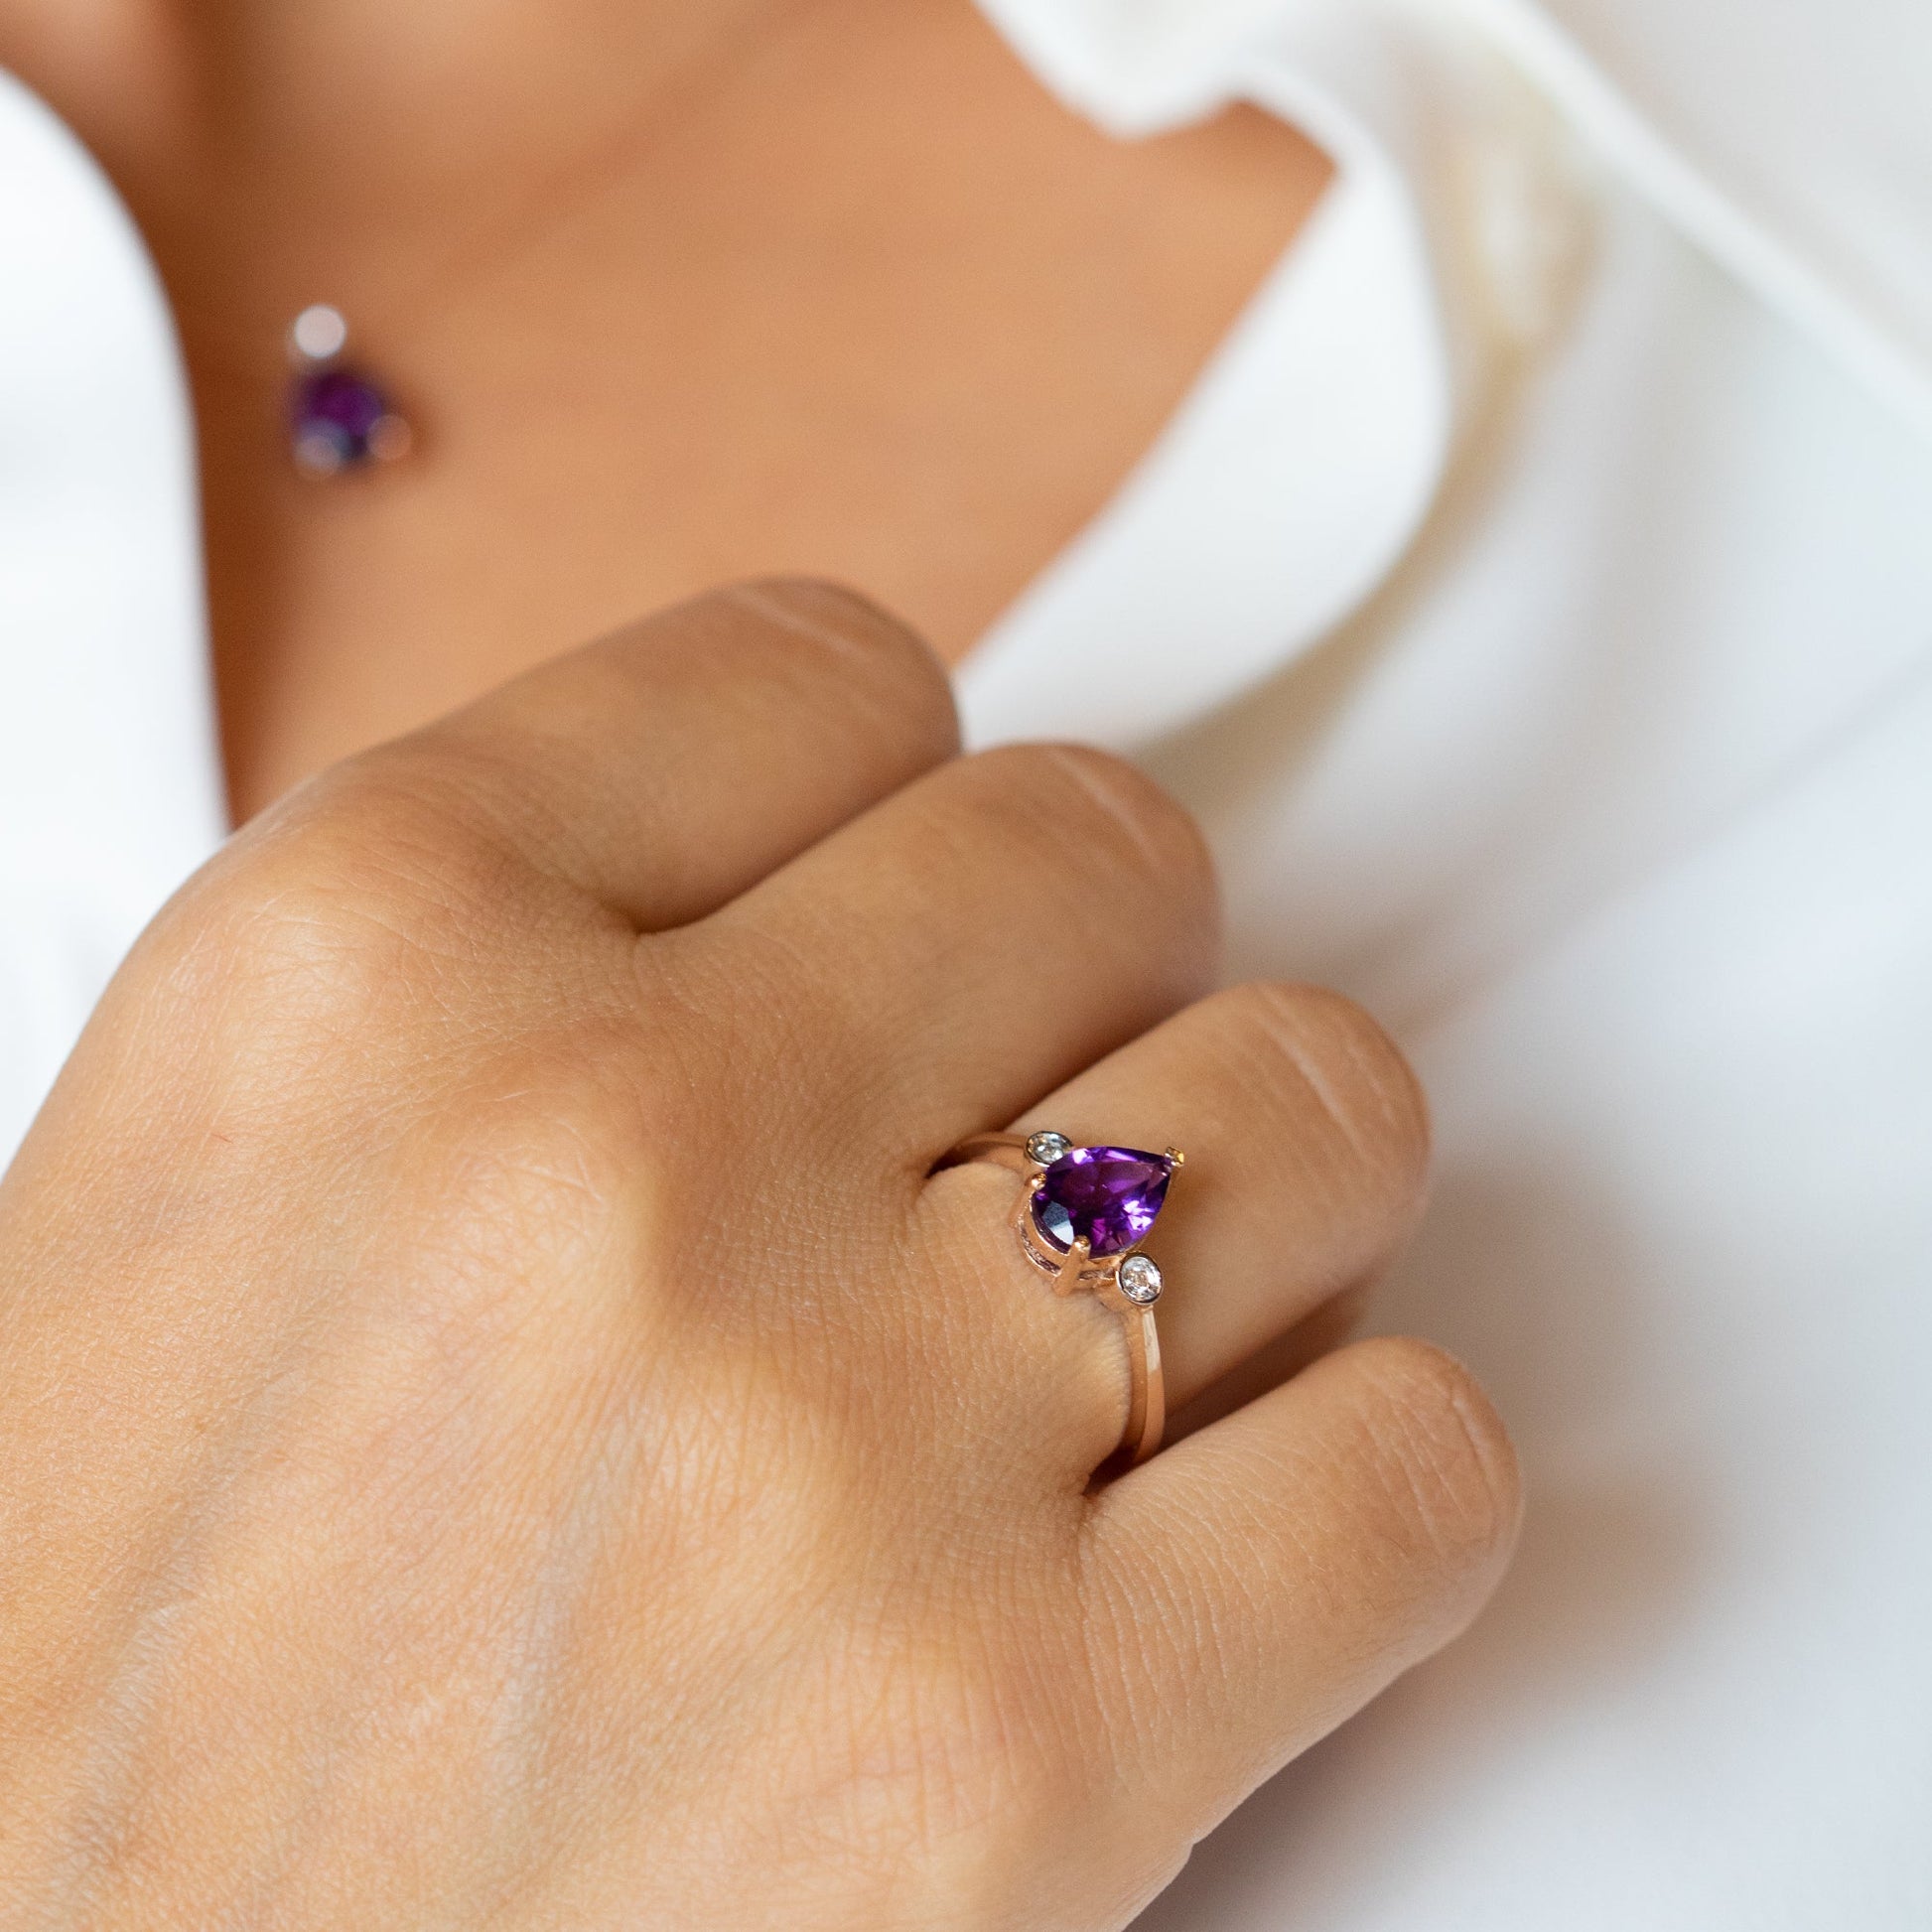  14K Yellow Gold Pear Amethyst Gemstone Ring - rings Shop online from Artisan Brands